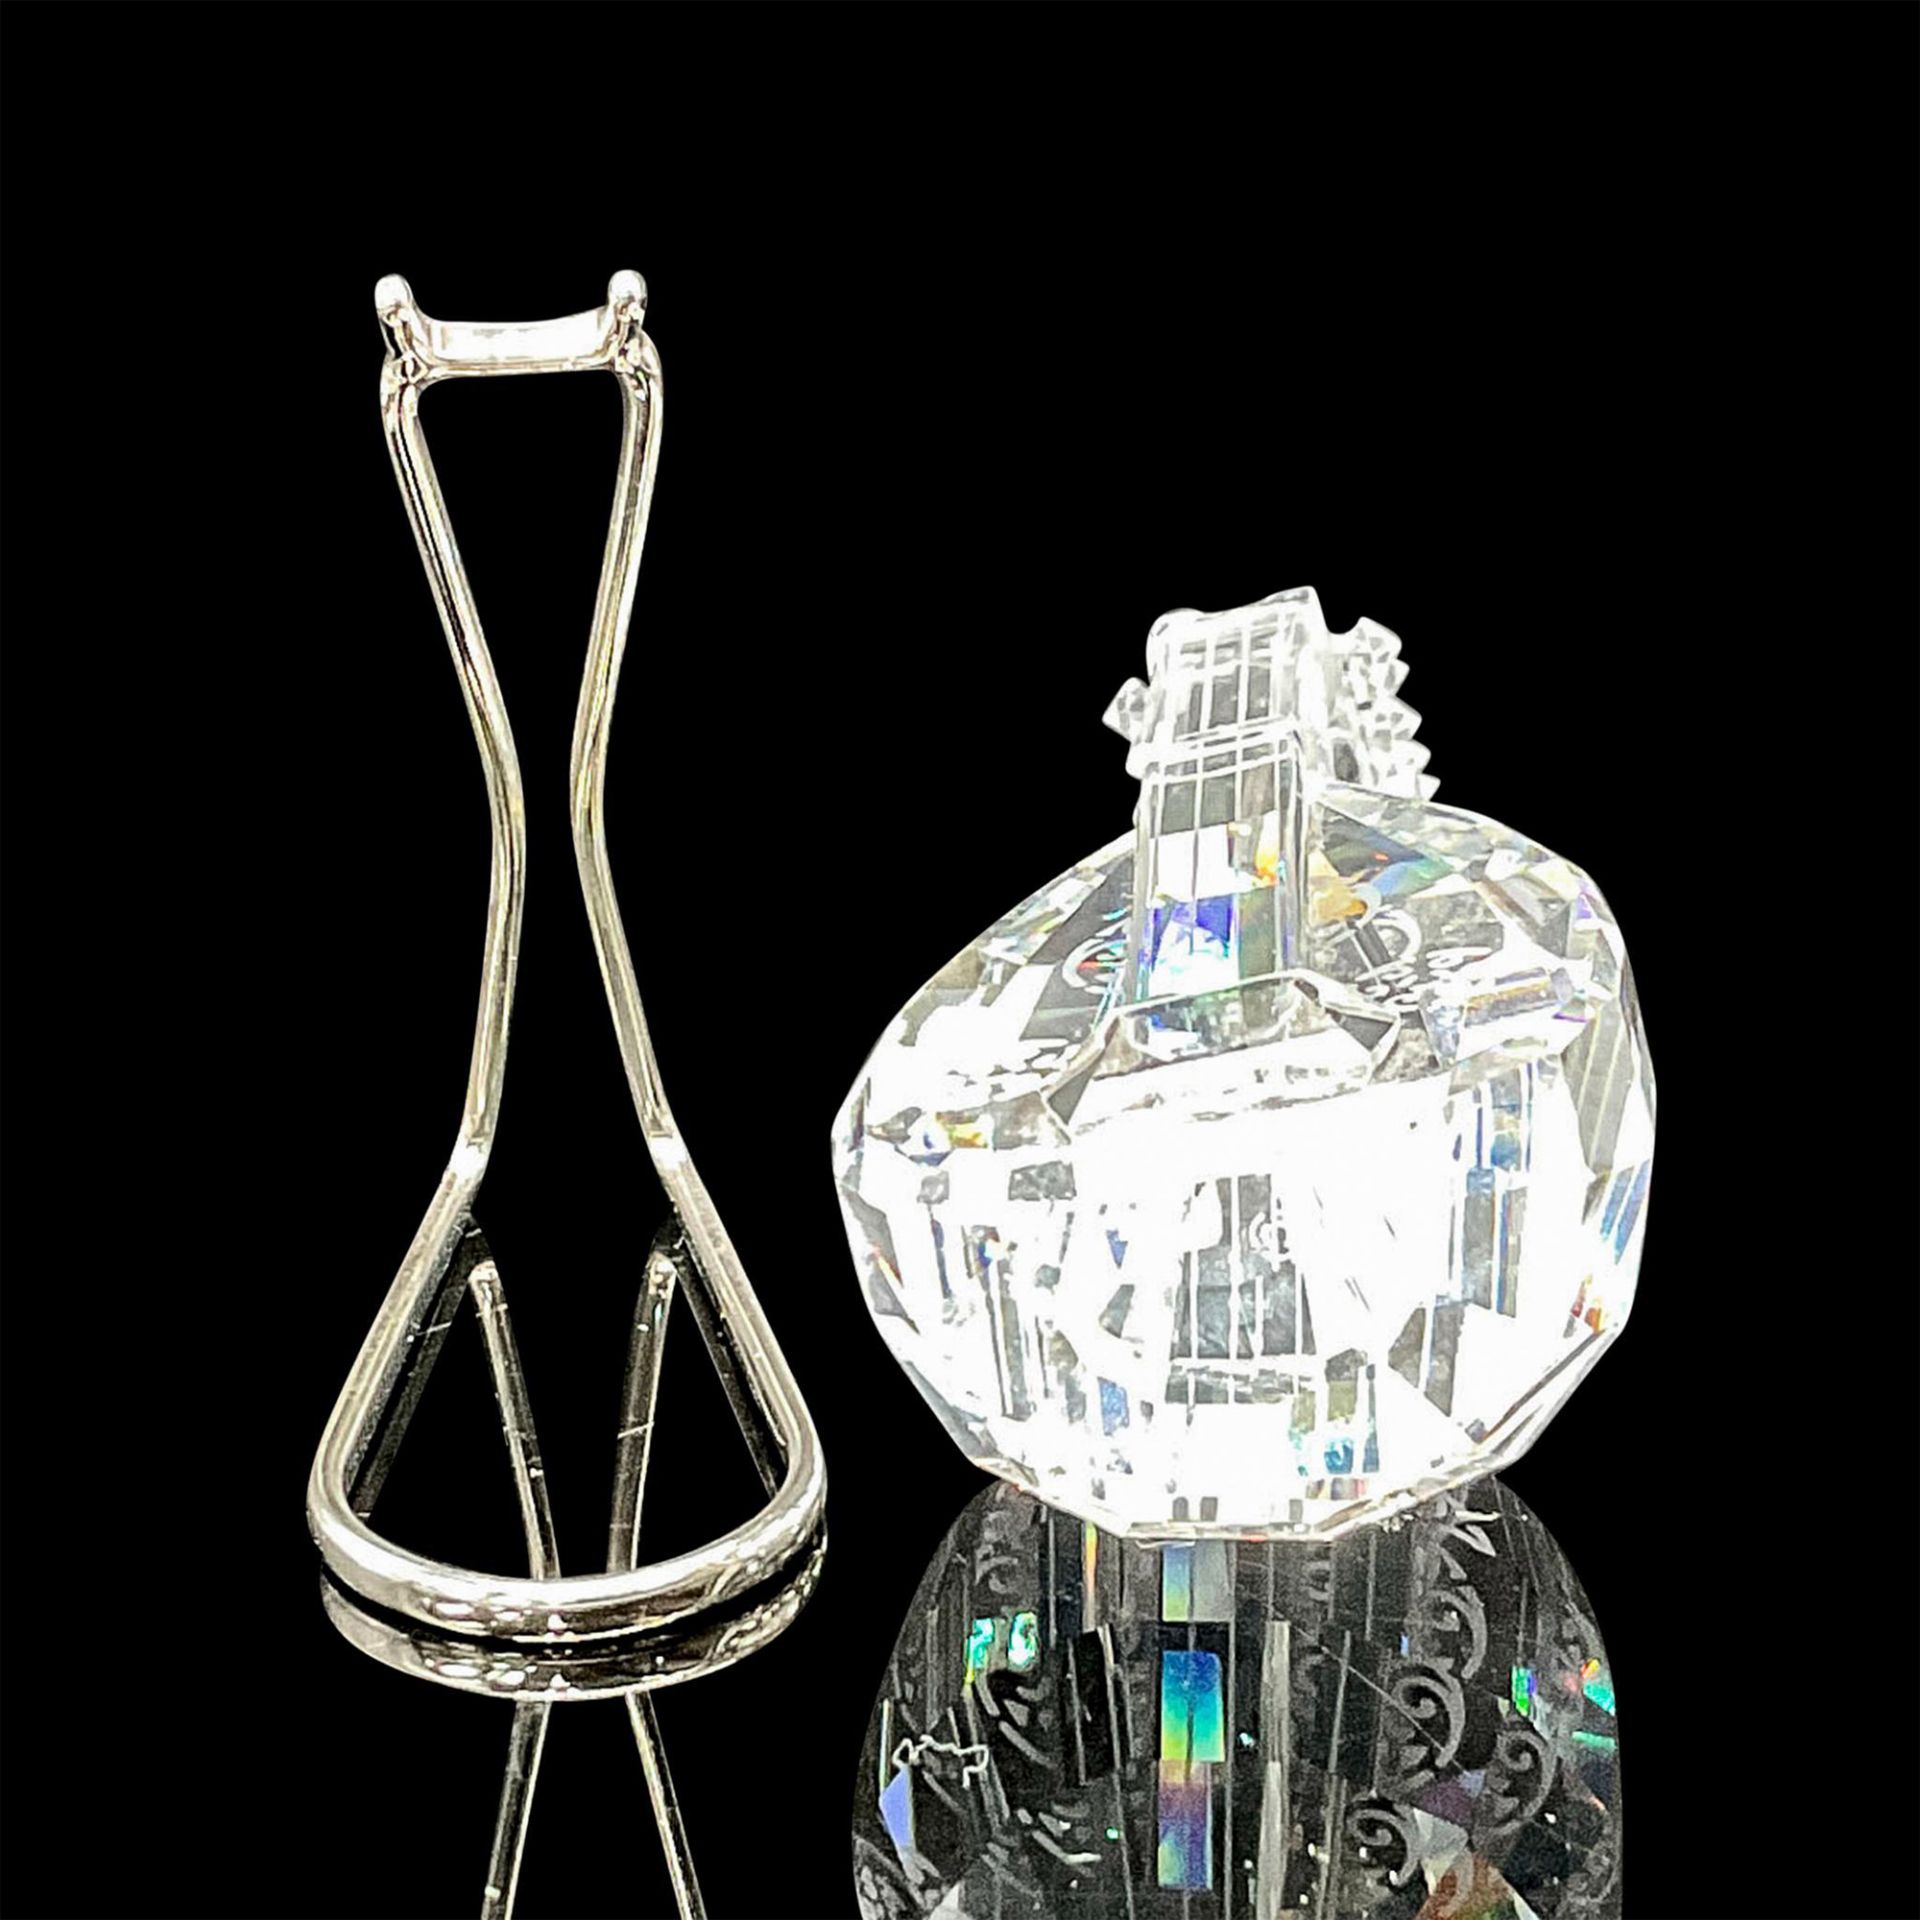 Swarovski Silver Crystal Figurine, Lute with Stand - Image 3 of 4